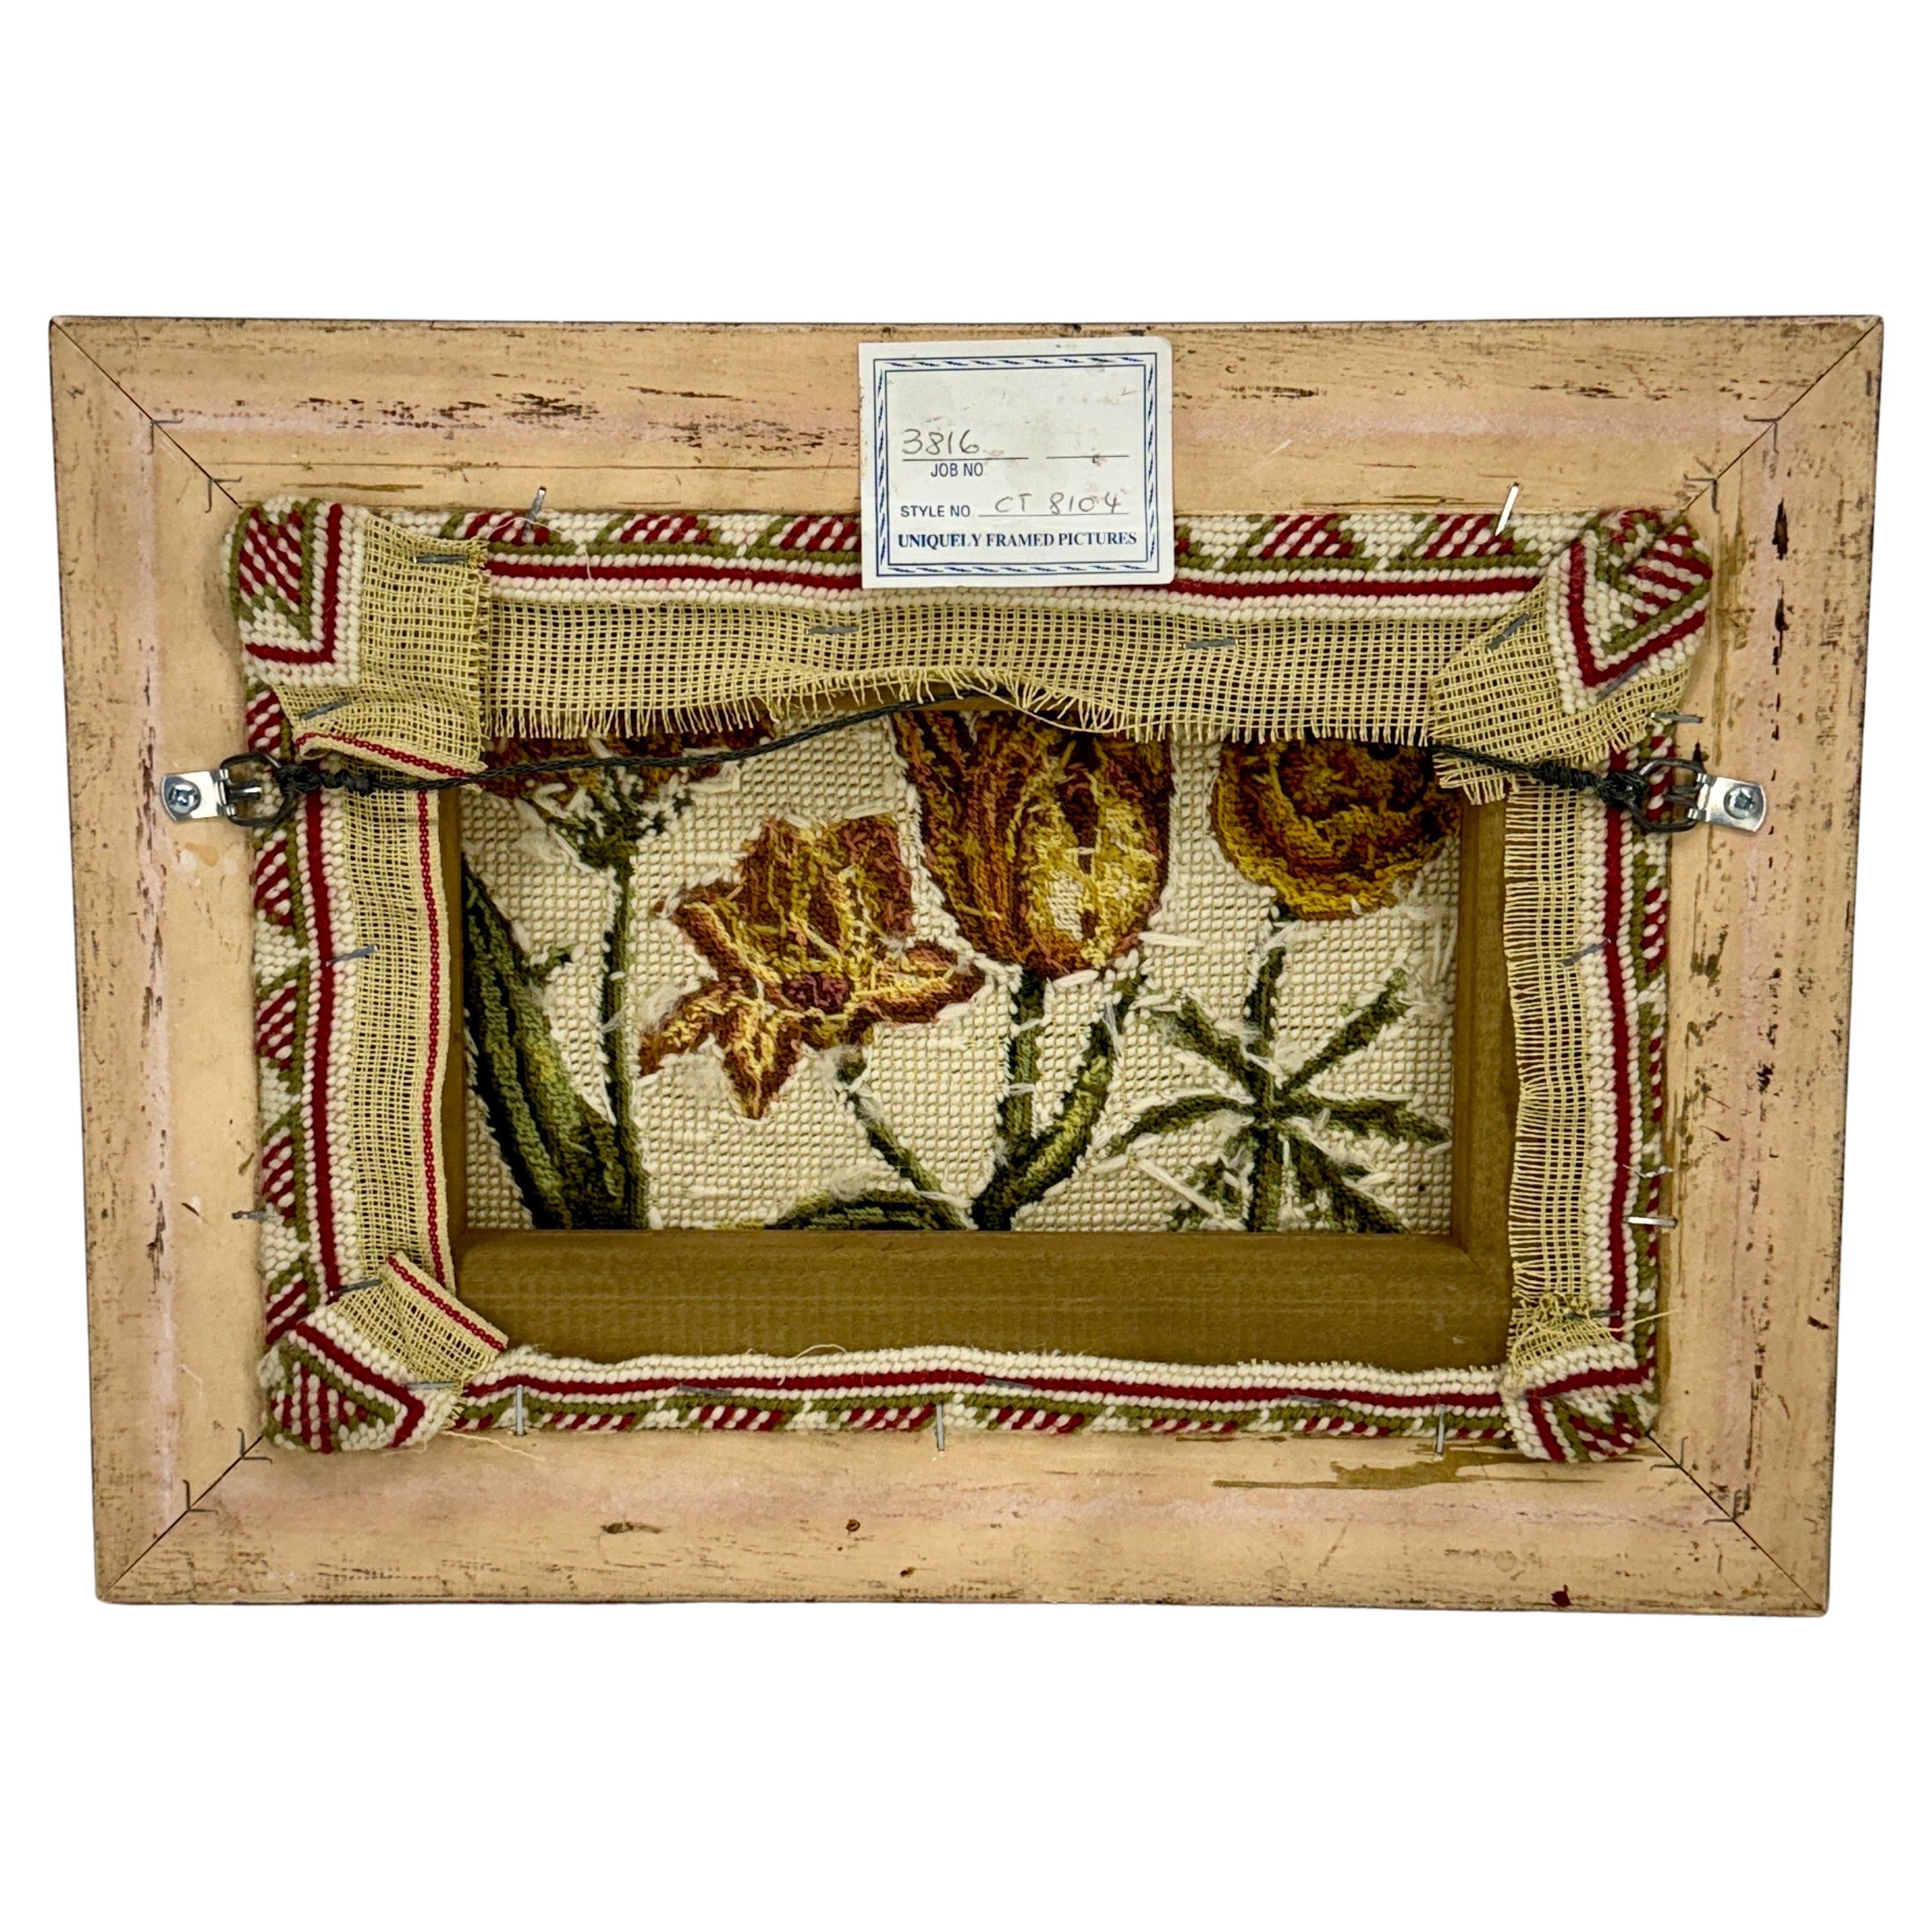  Needlepoint Wood Framed Artwork of Tulips from Chelsea Textiles

One-of-a-kind needlepoint artwork from Chelsea Textiles. This framed artwork features tulips in rust, orange, yellow and green colors. This classic piece of art would make a suitable